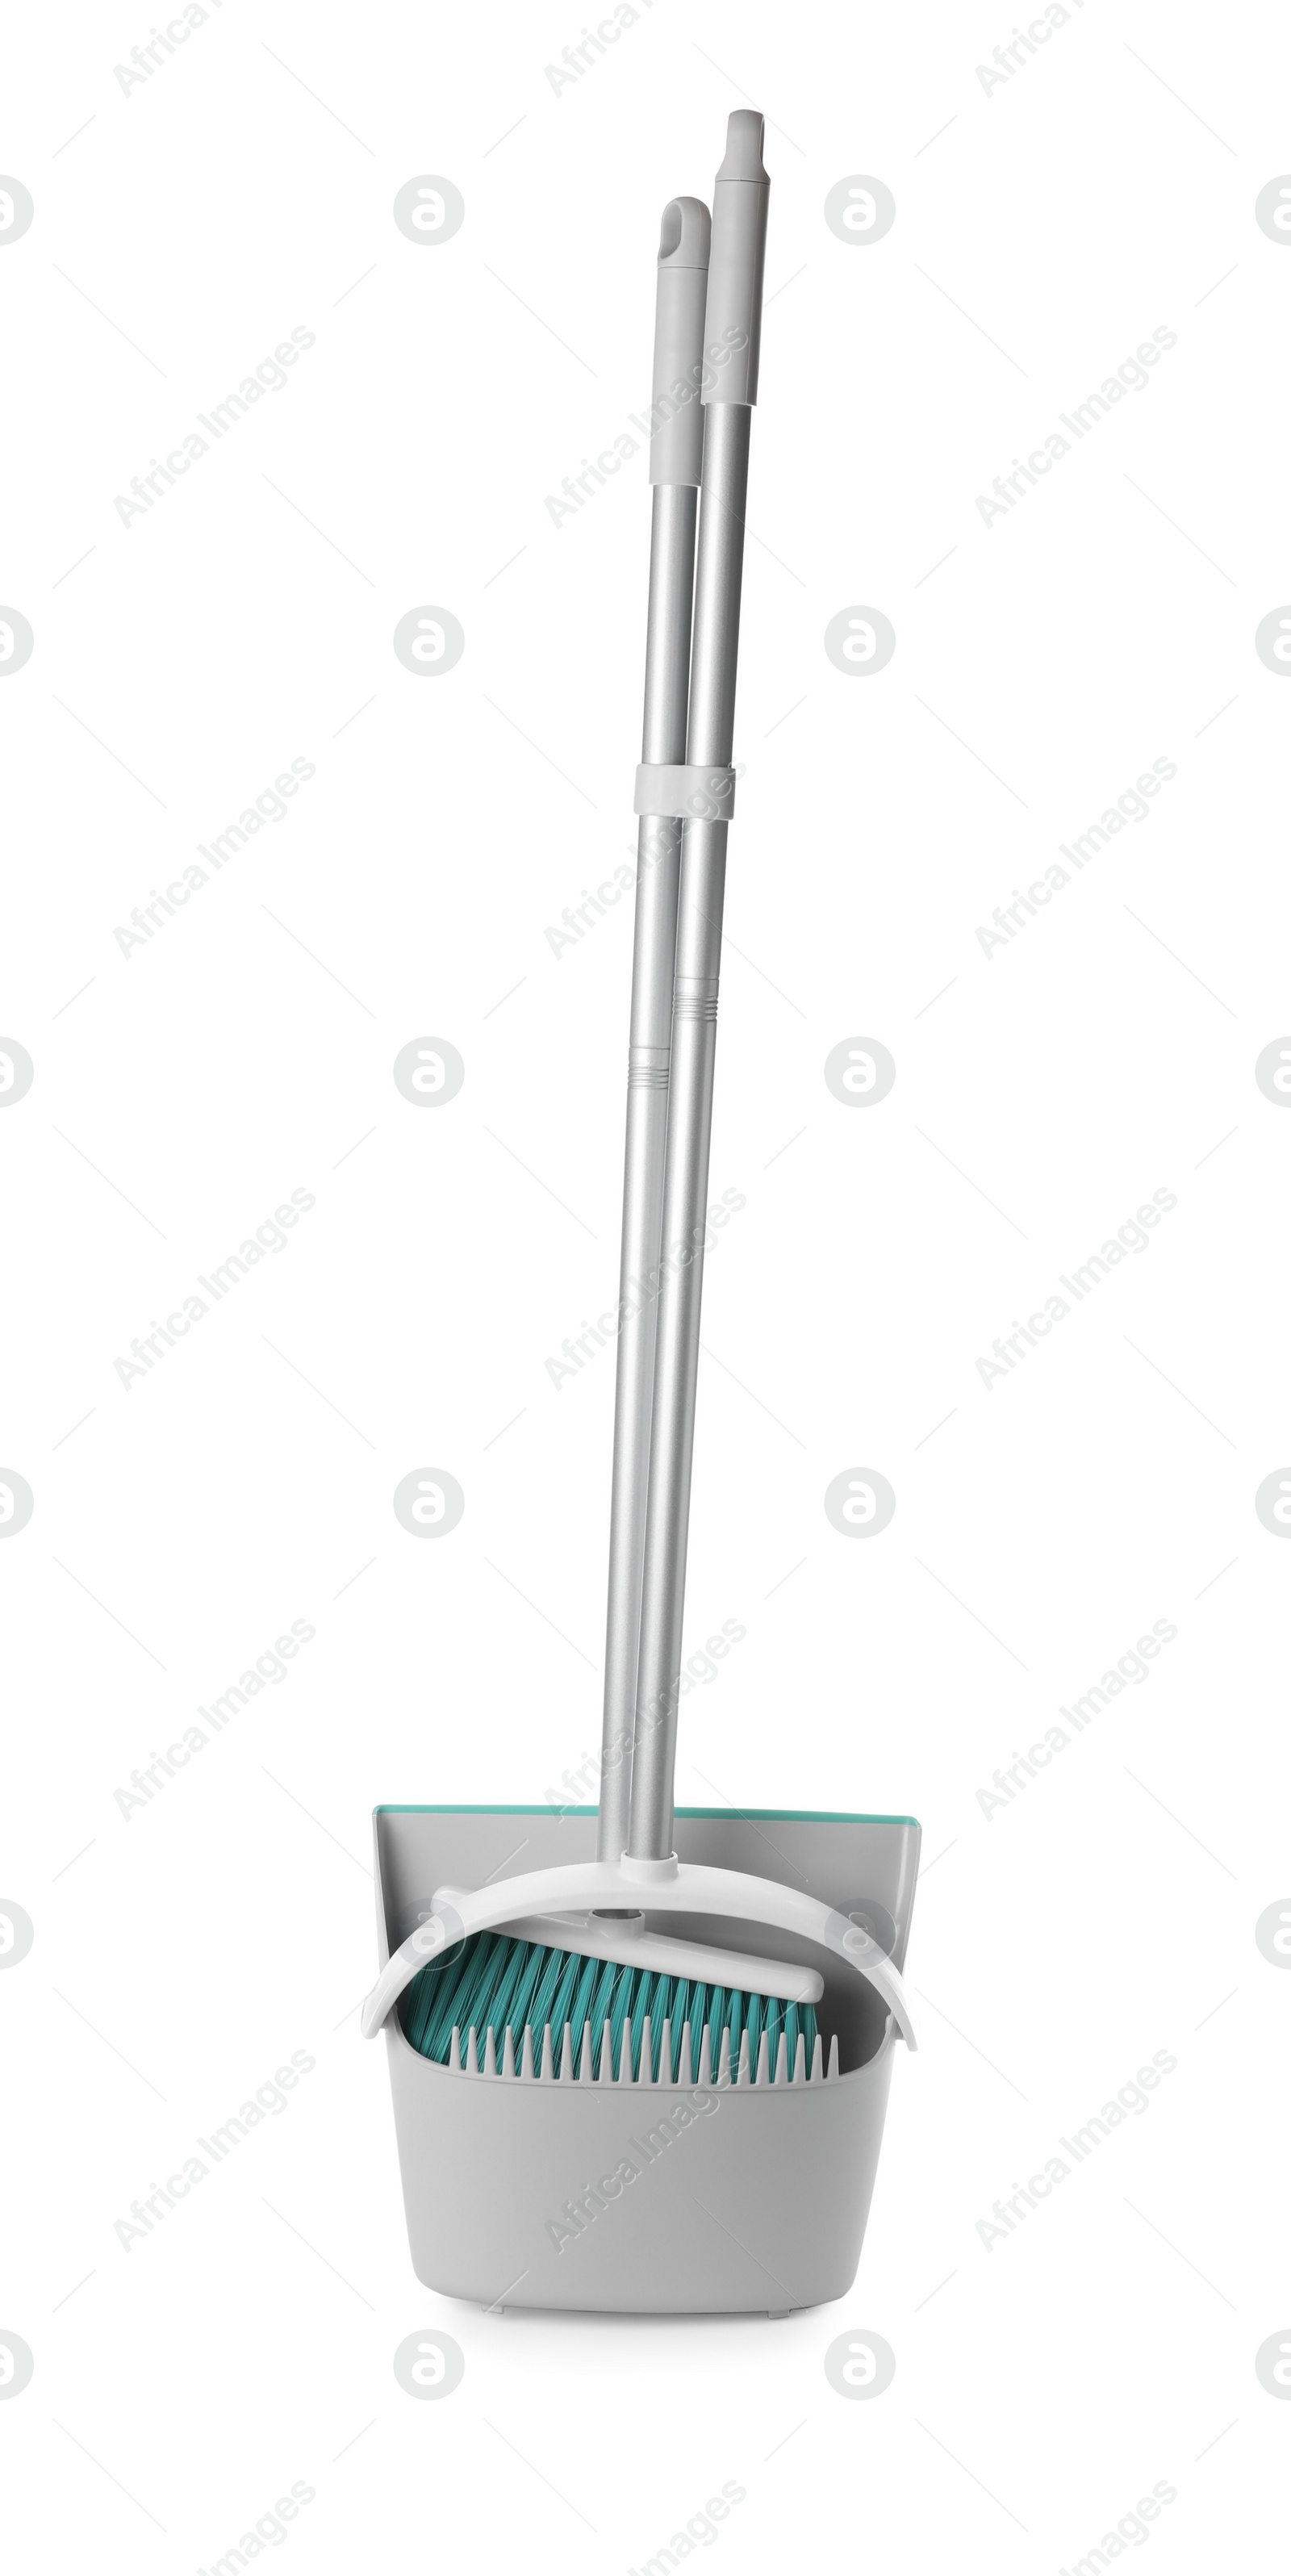 Photo of Plastic broom and dustpan isolated on white